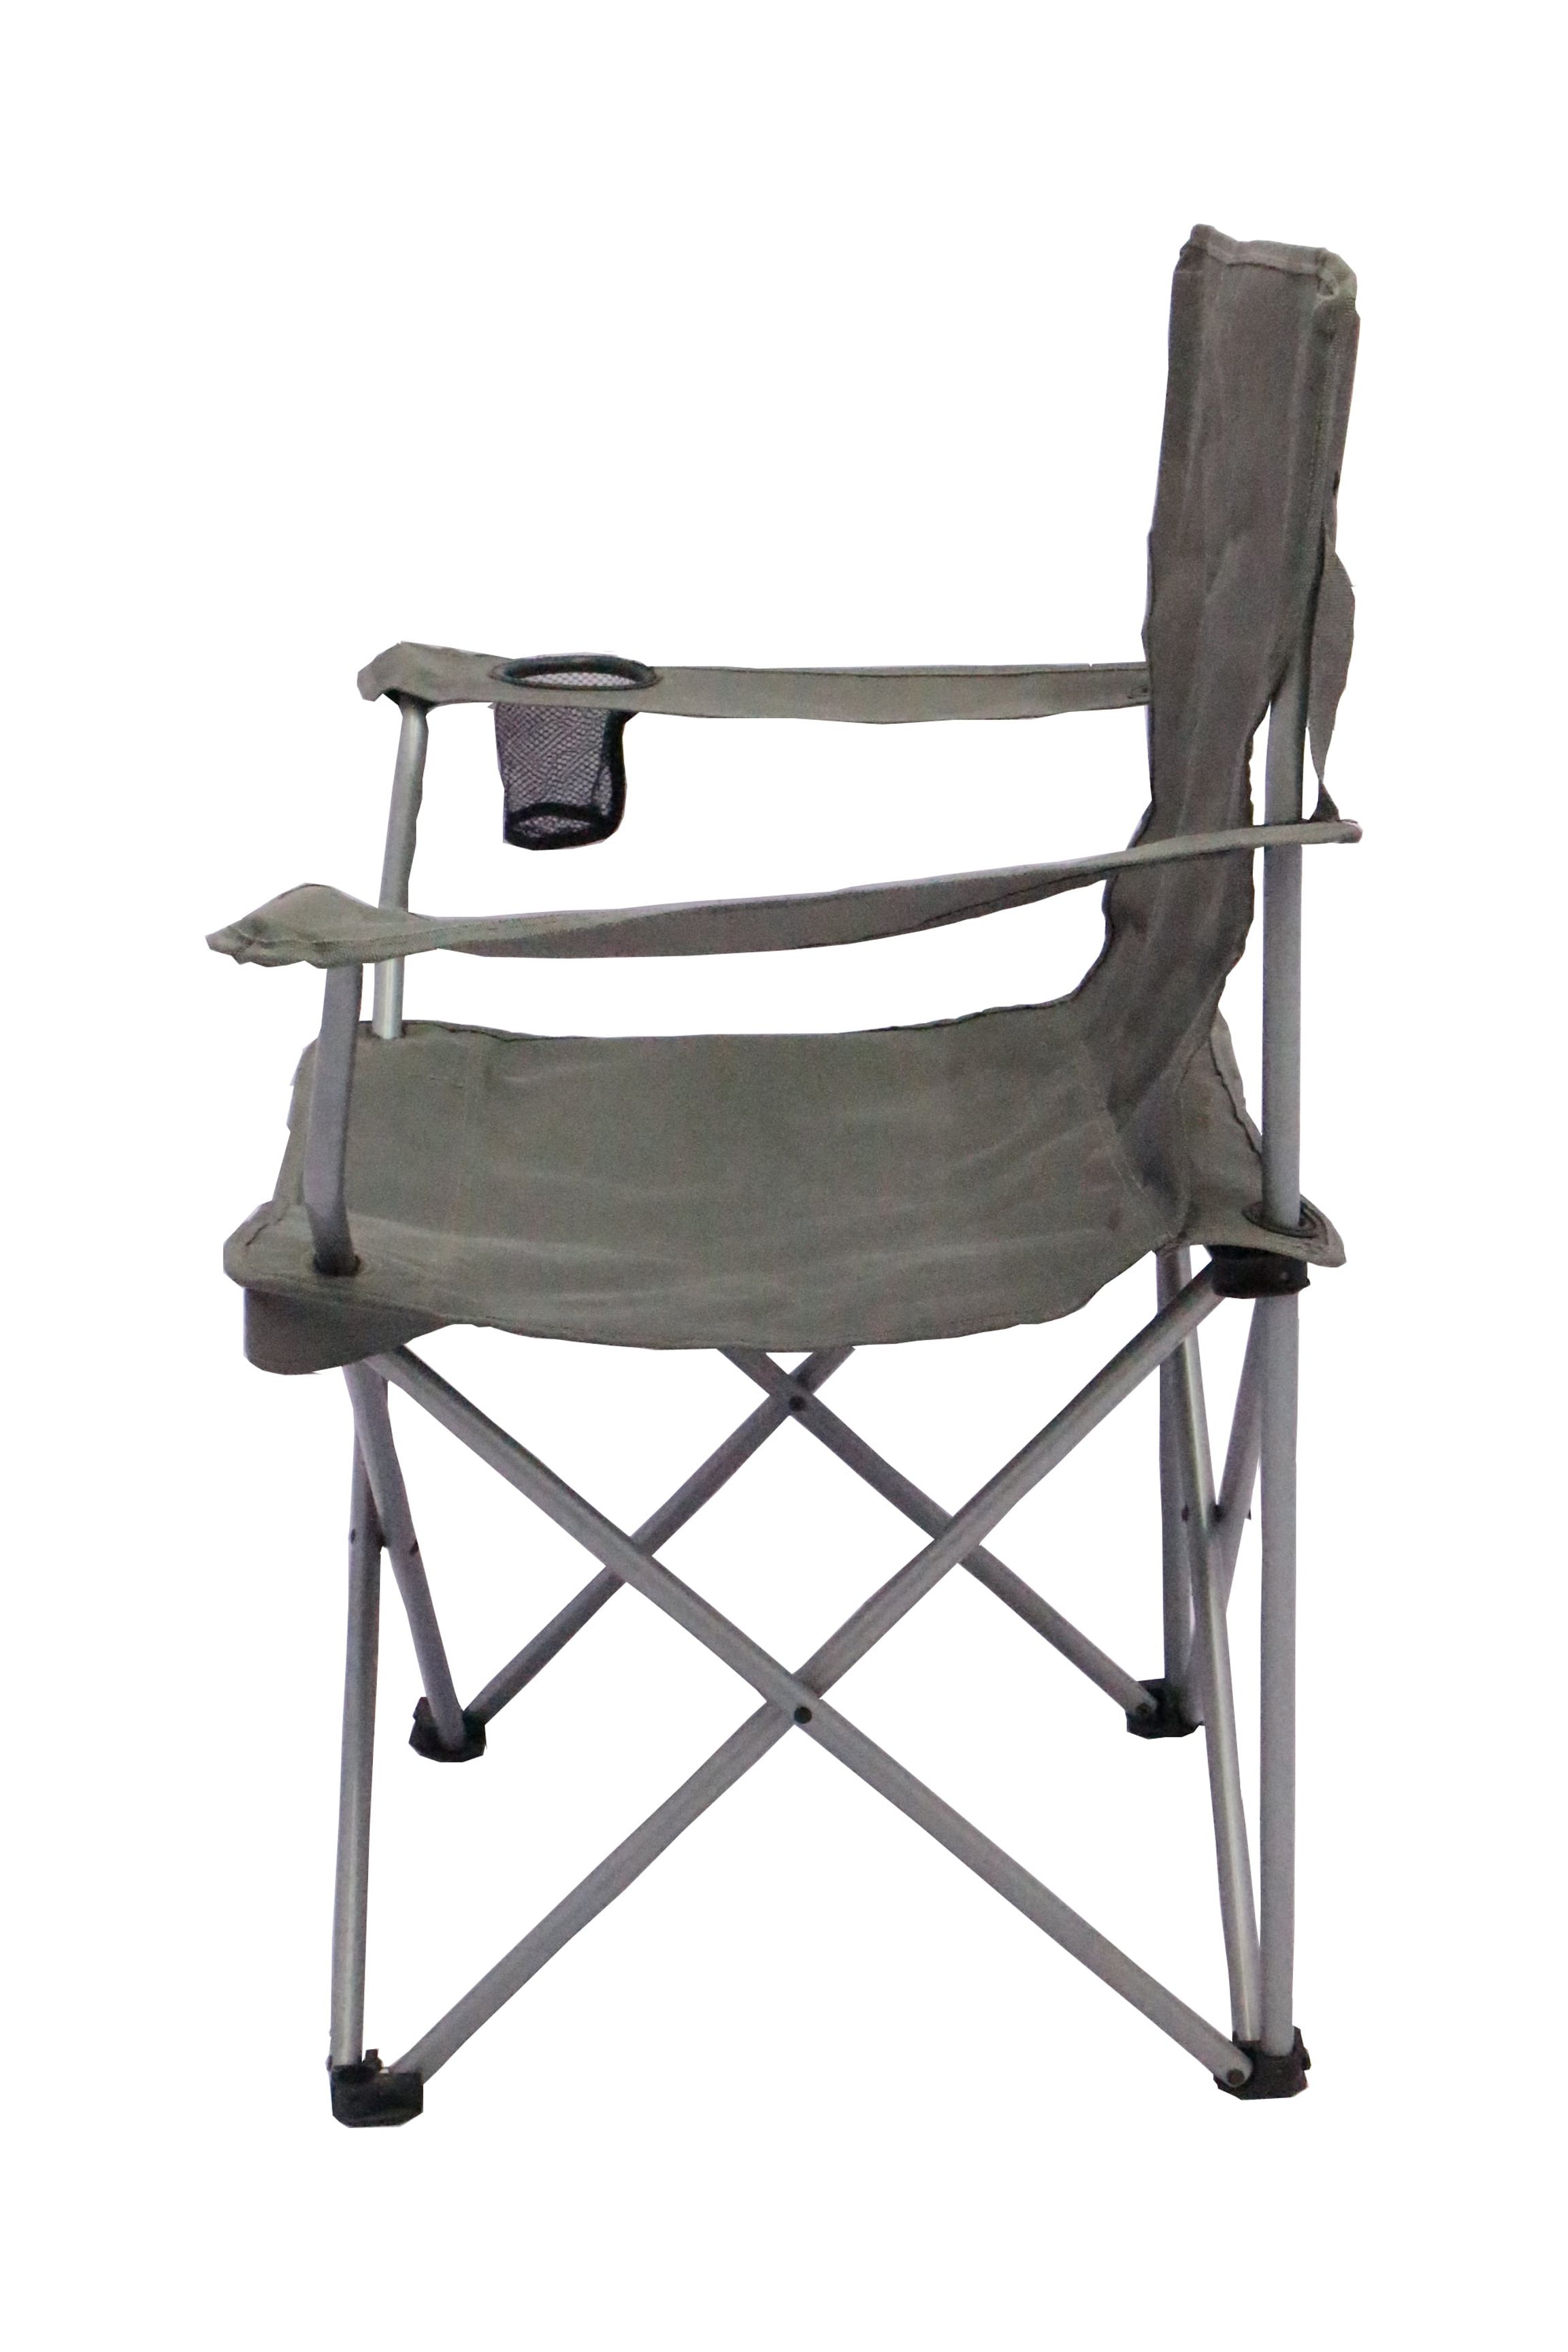 Ozark Trail Classic Folding Camp Chairs, with Mesh Cup Holder,Set of 4, 32.10 x 19.10 x 32.10 Inches - image 3 of 10